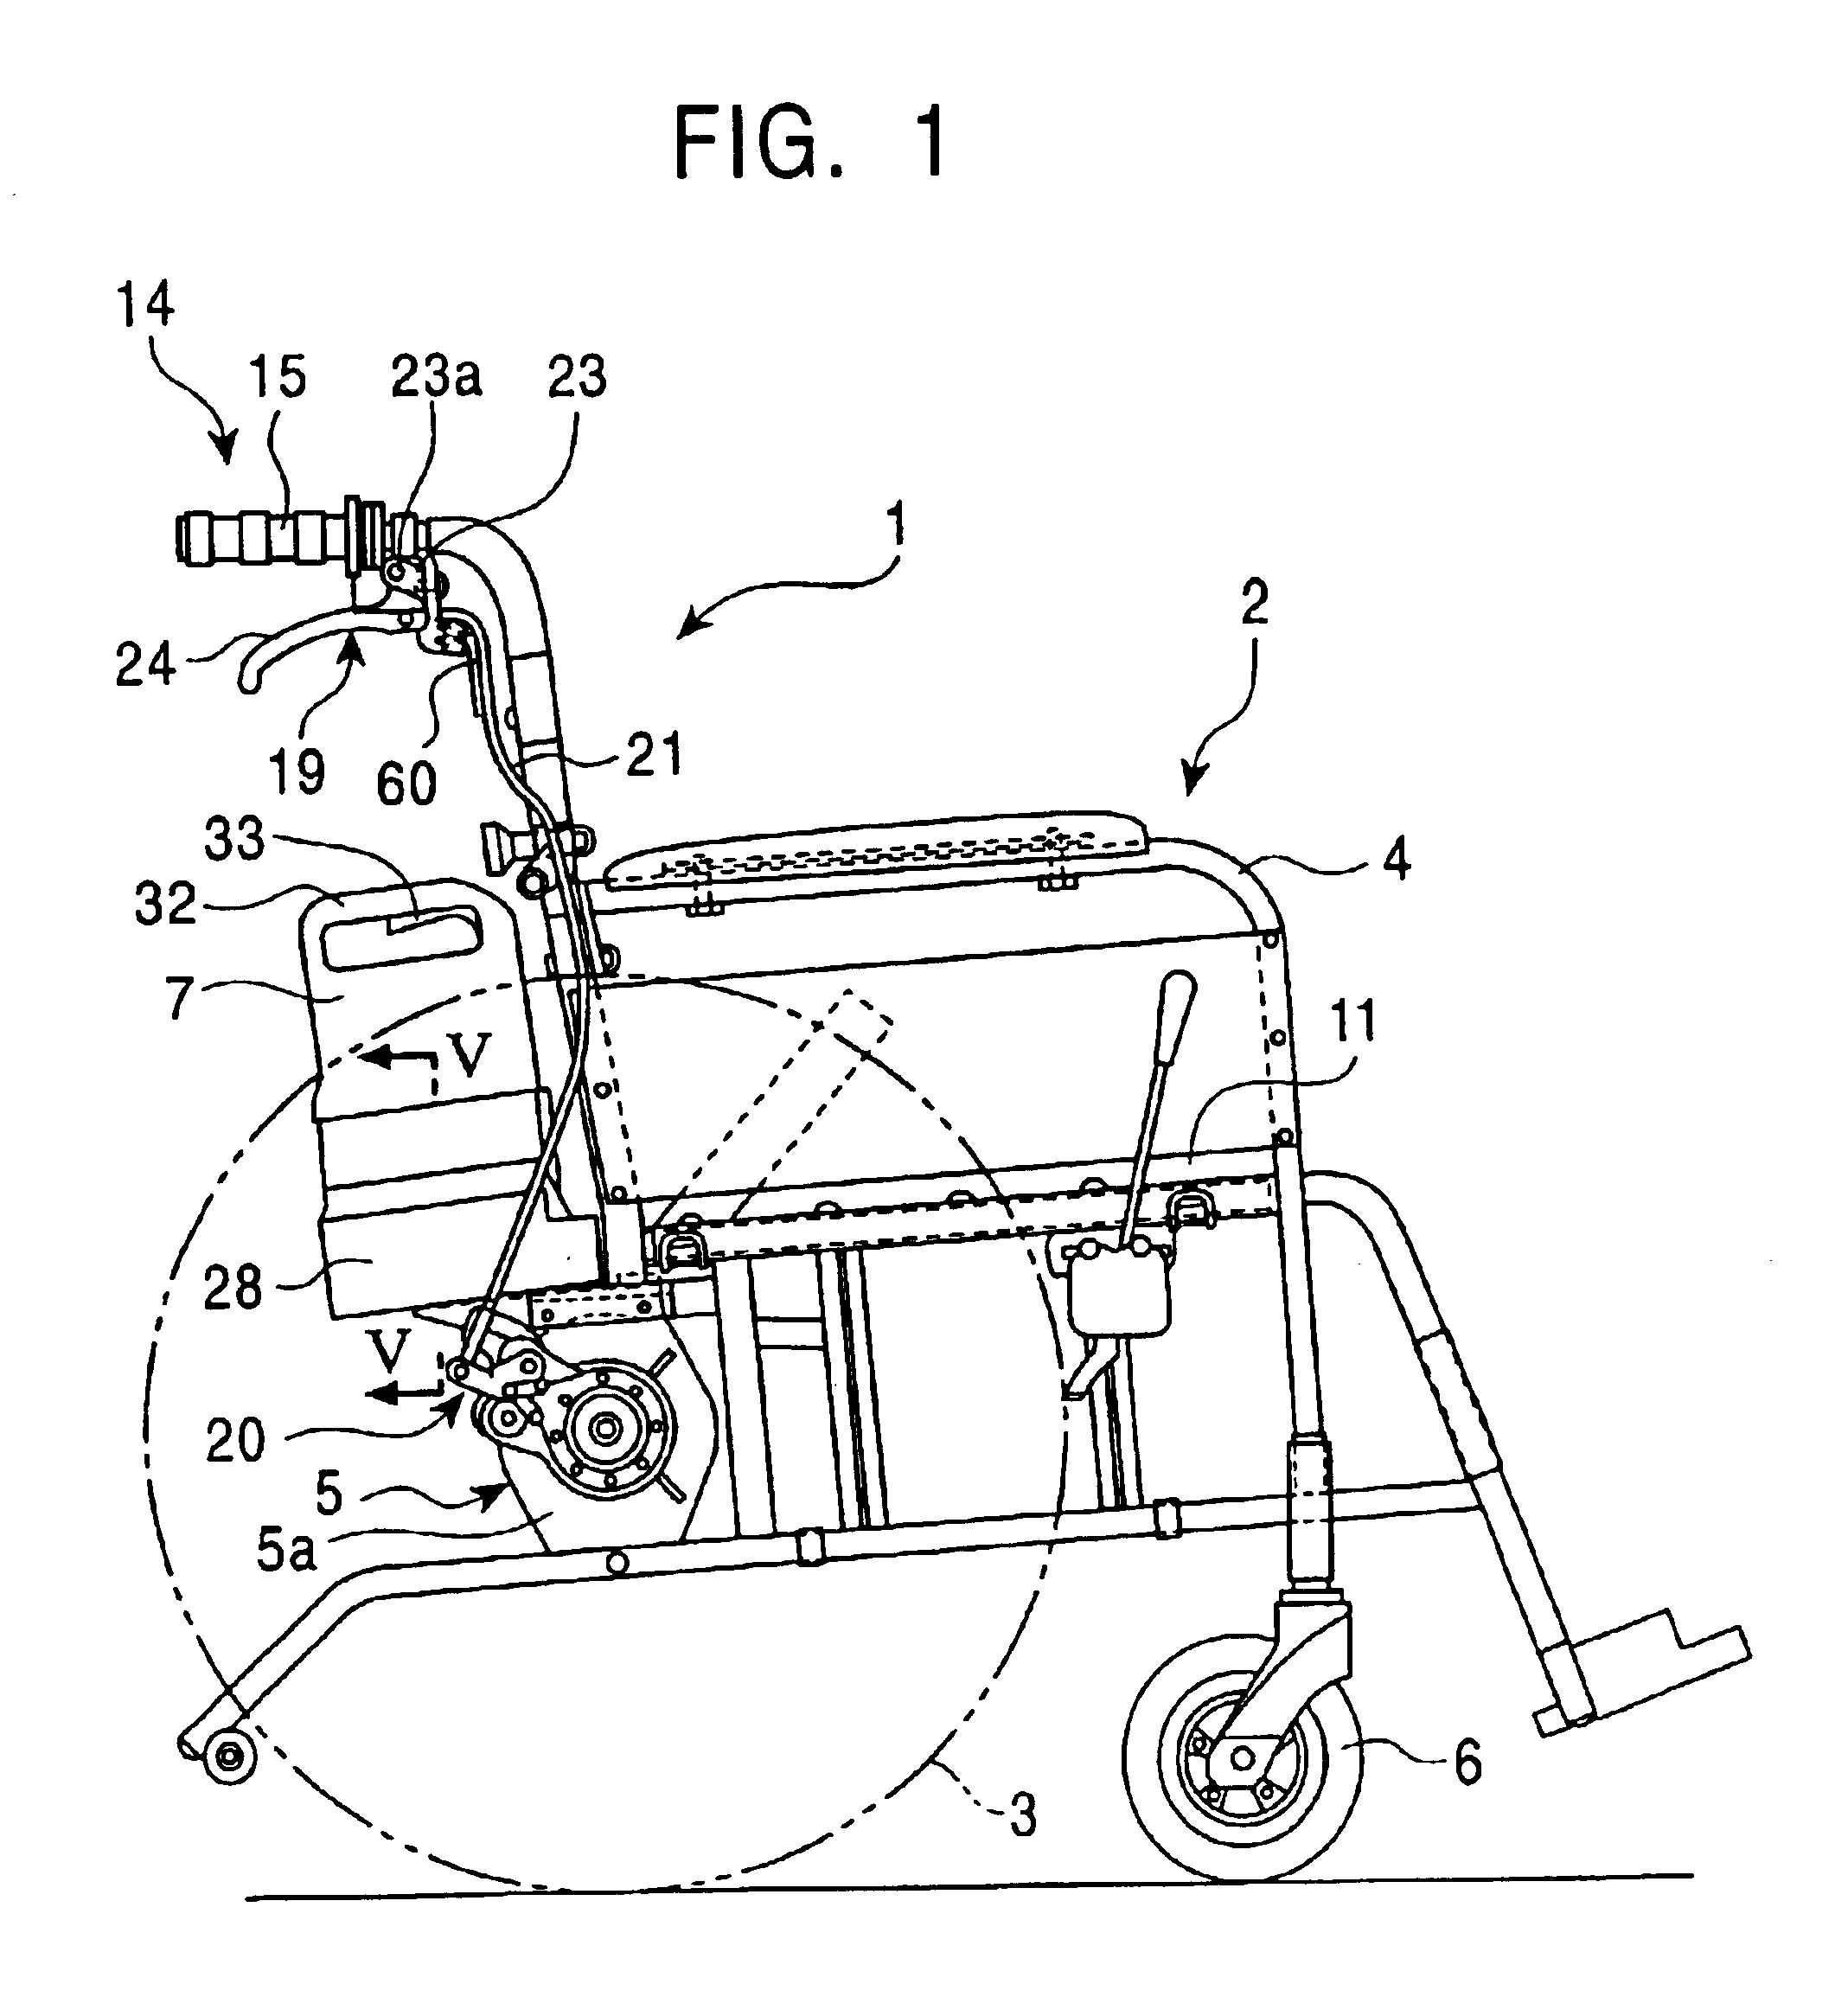 Electric-powered vehicle